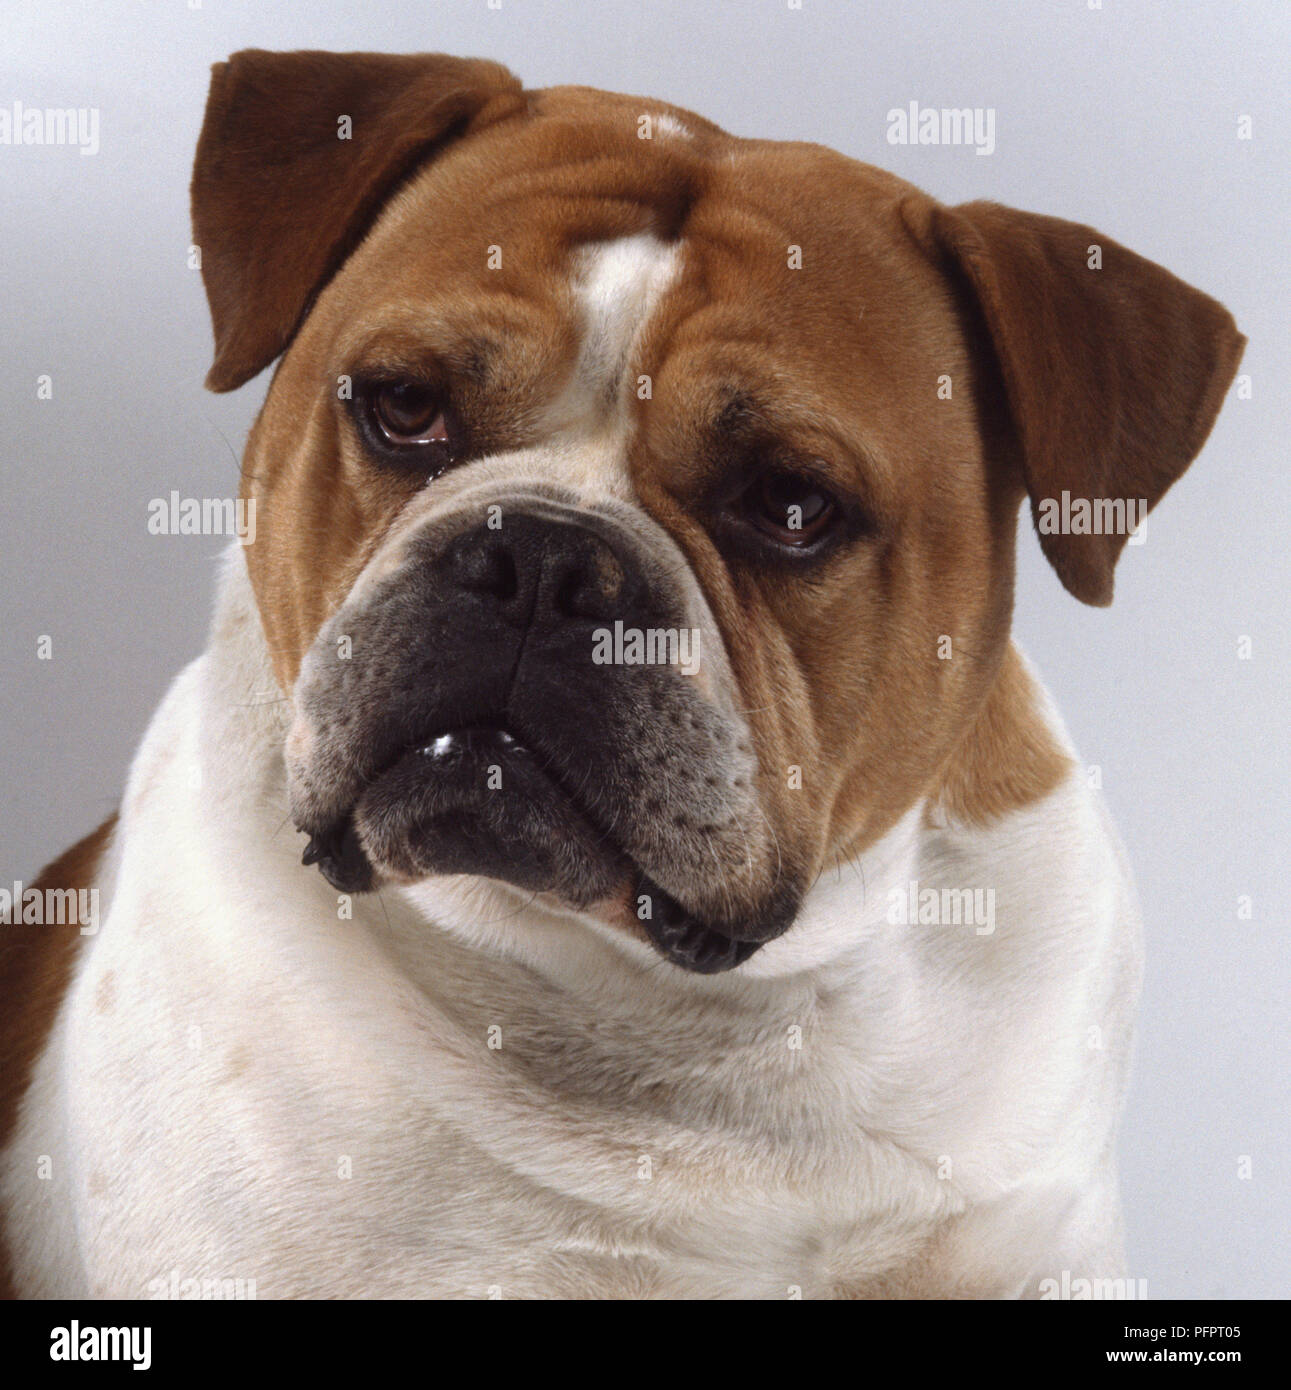 A scowling stocky brown and white Olde English Bulldogge tilts its head slightly Stock Photo